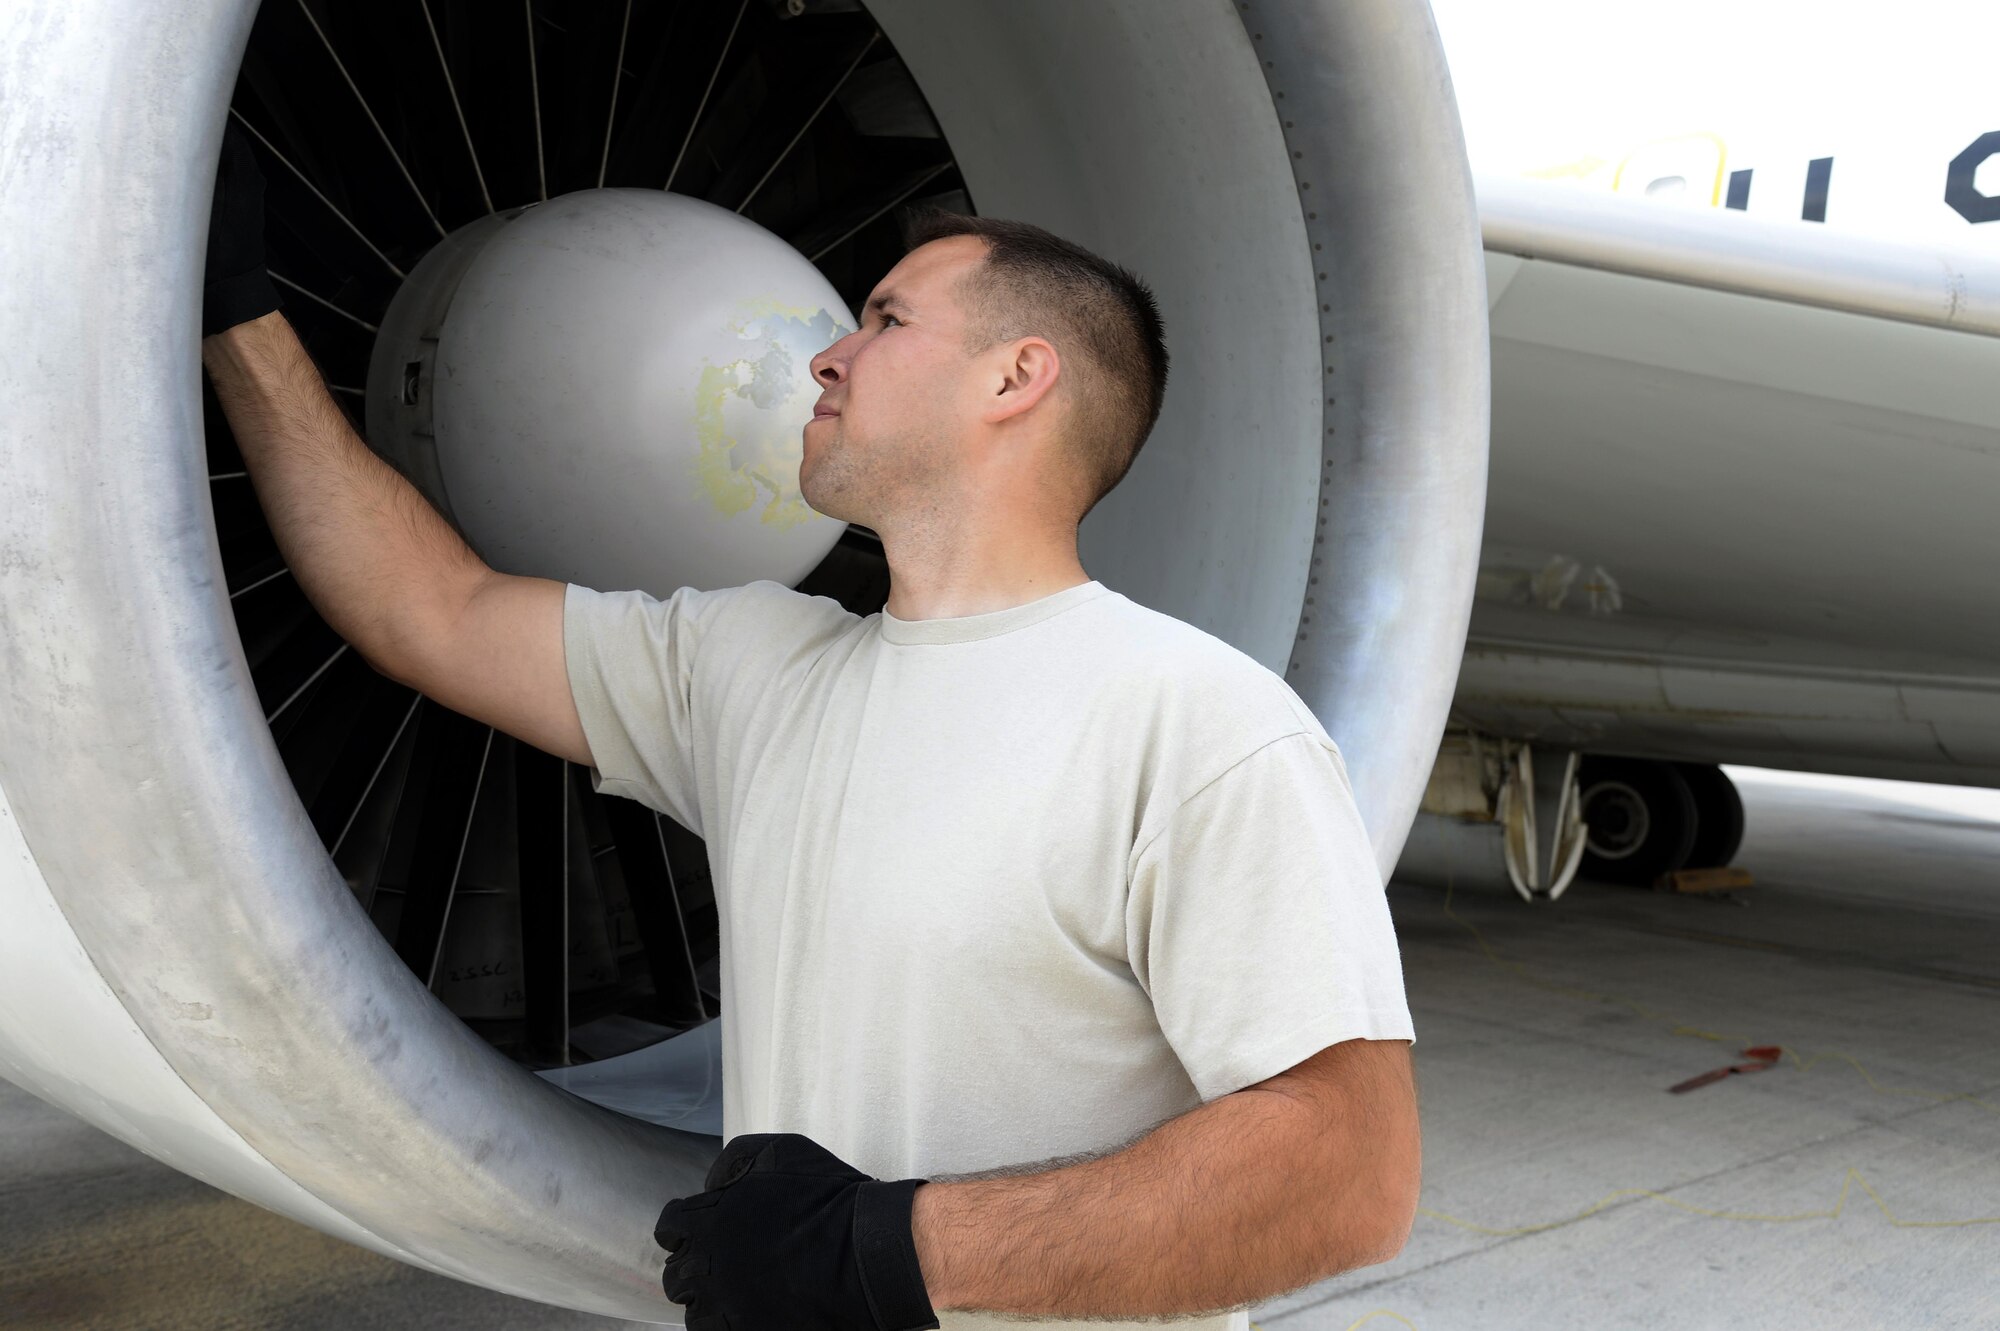 Staff Sgt. Derek, aerospace propulsion craftsman, performs an inlet and exhaust inspection on an E-3 Sentry airborne warning and control system aircraft at an undisclosed location in Southwest Asia Feb. 24, 2015. The Sentry Aircraft Maintenance Unit is a group of guardians who blend several special powers, ranging from radar to hydraulics, and band together to ensure the E-3 Sentry AWACS maintains its operational capability. Derek is currently deployed from Tinker Air Force Base, Okla., and is a native of Waterboro, Maine. (U.S. Air Force photo/Tech. Sgt. Marie Brown)